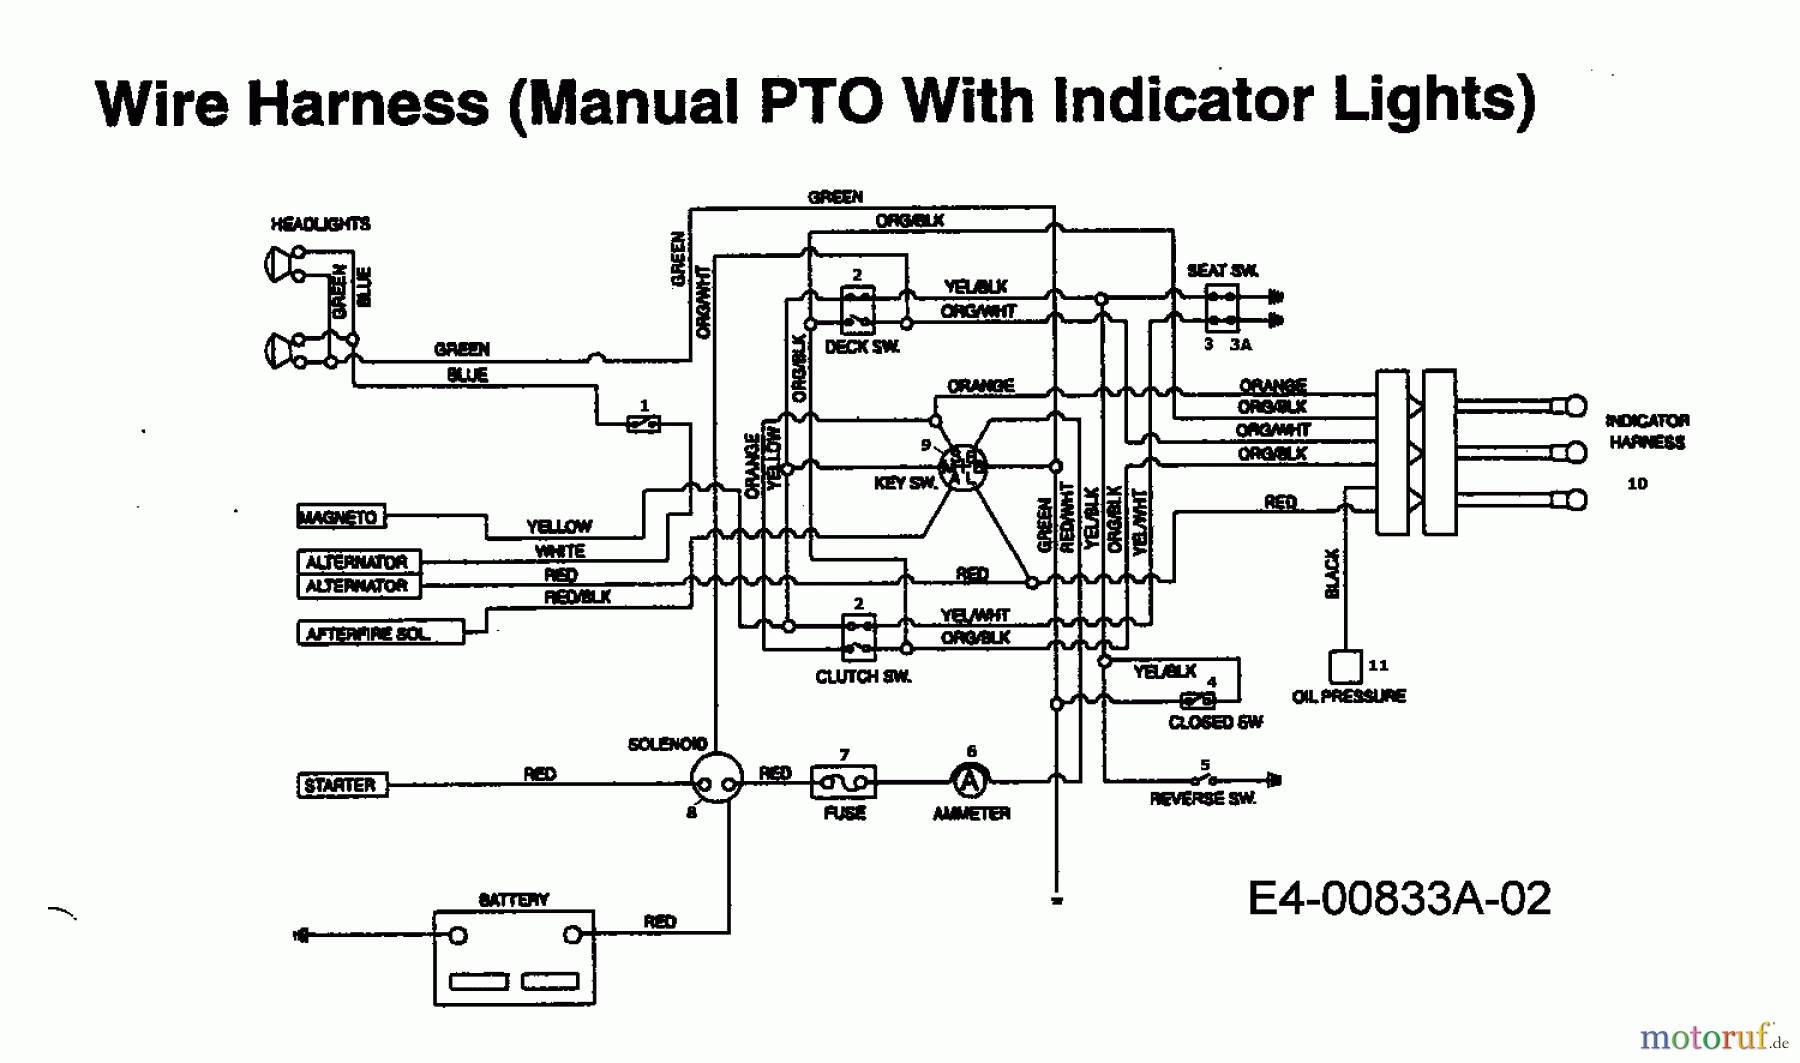  MTD Lawn tractors IB 162 HST 13AF795N606  (1998) Wiring diagram with indicator lights